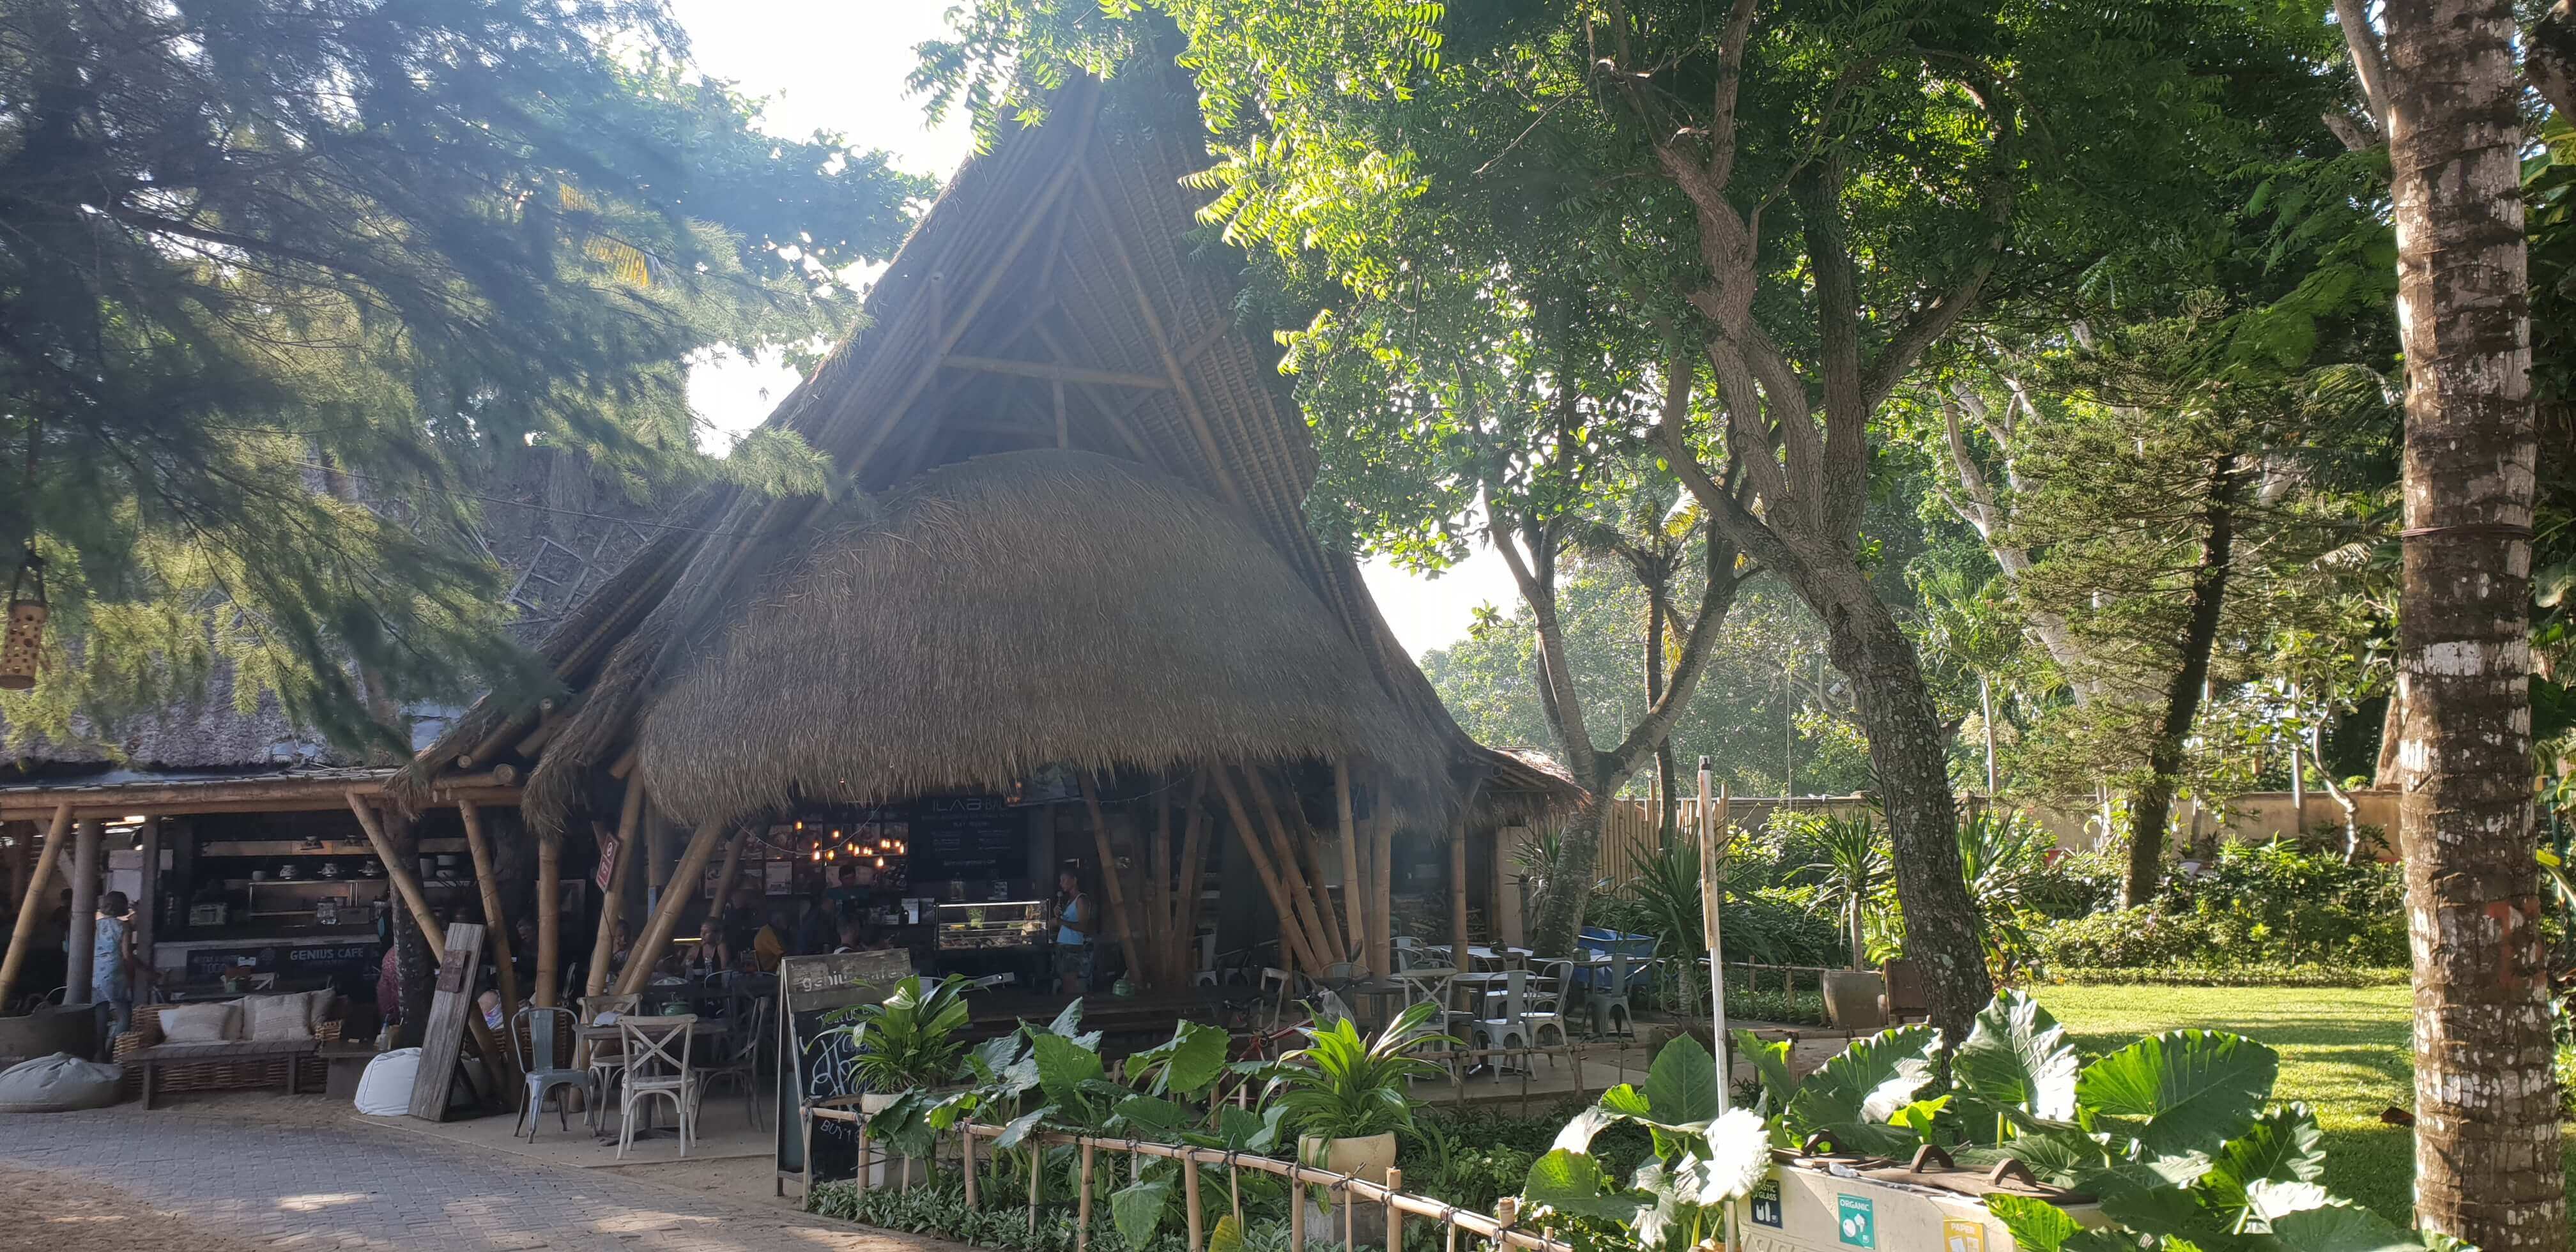 Spending time at Genius Cafe is one of the best things to do in Sanur